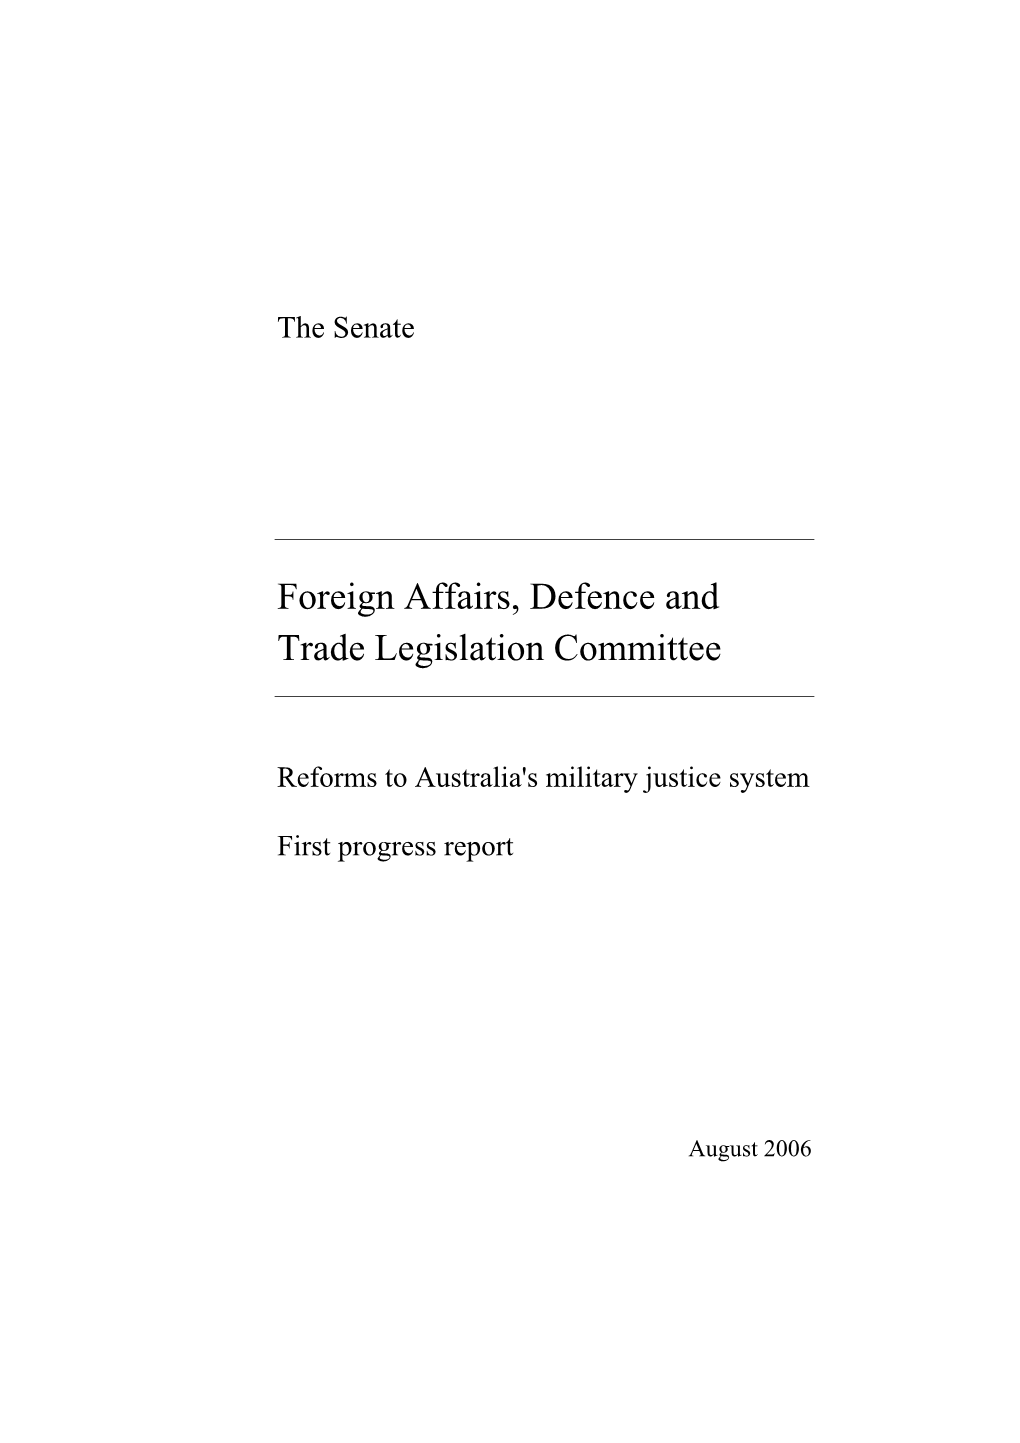 Foreign Affairs, Defence and Trade Legislation Committee